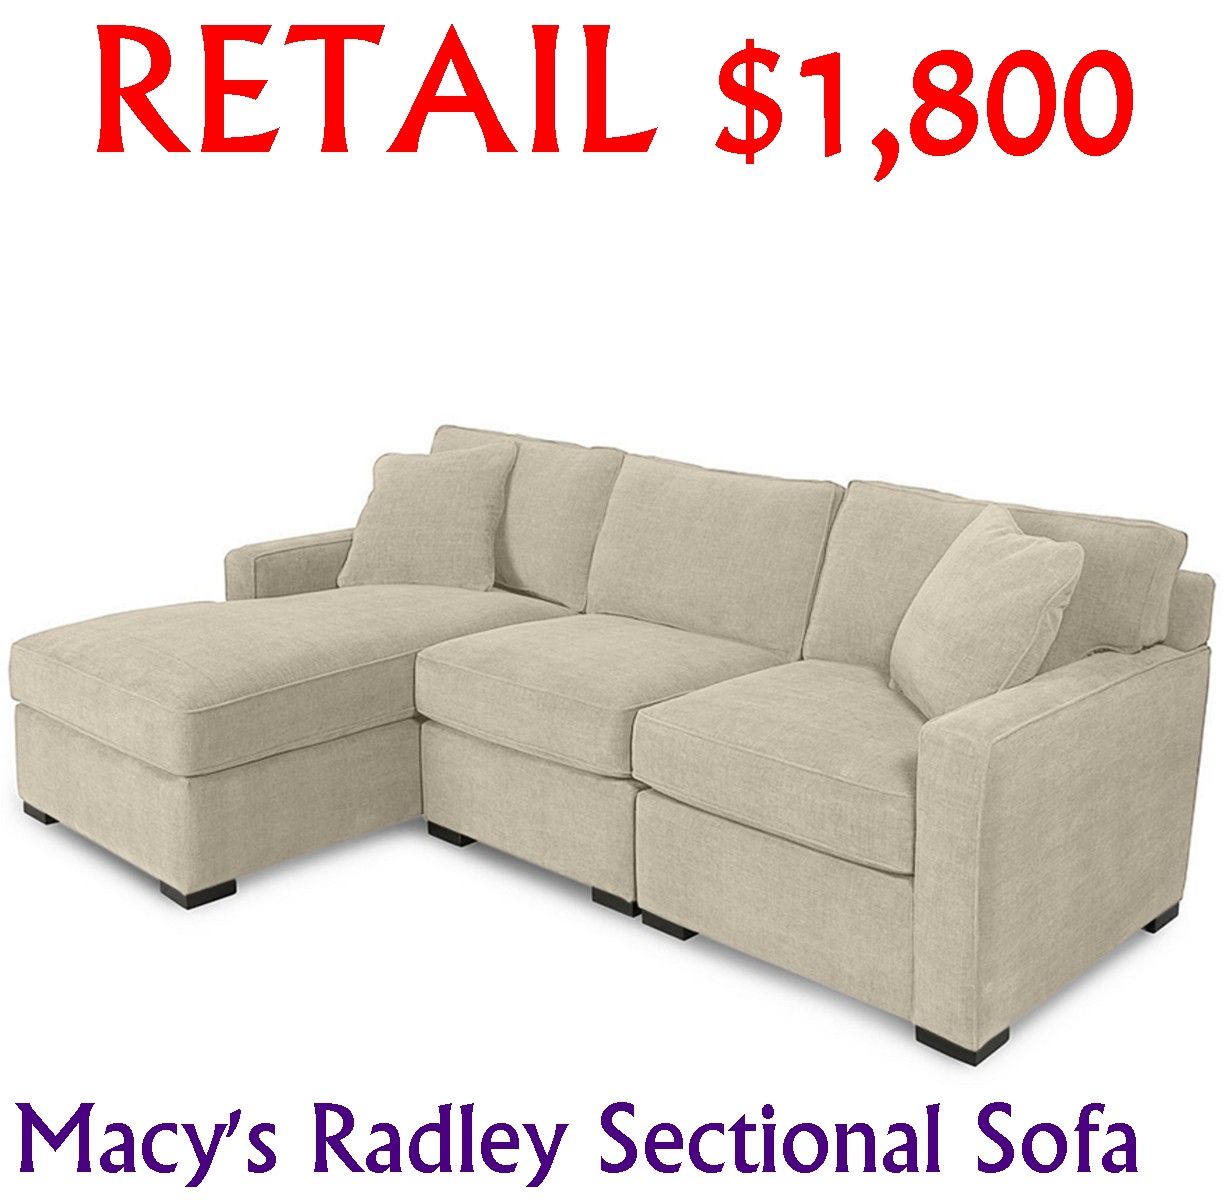 Macy's Radley Sectional Chaise Sofa Couch